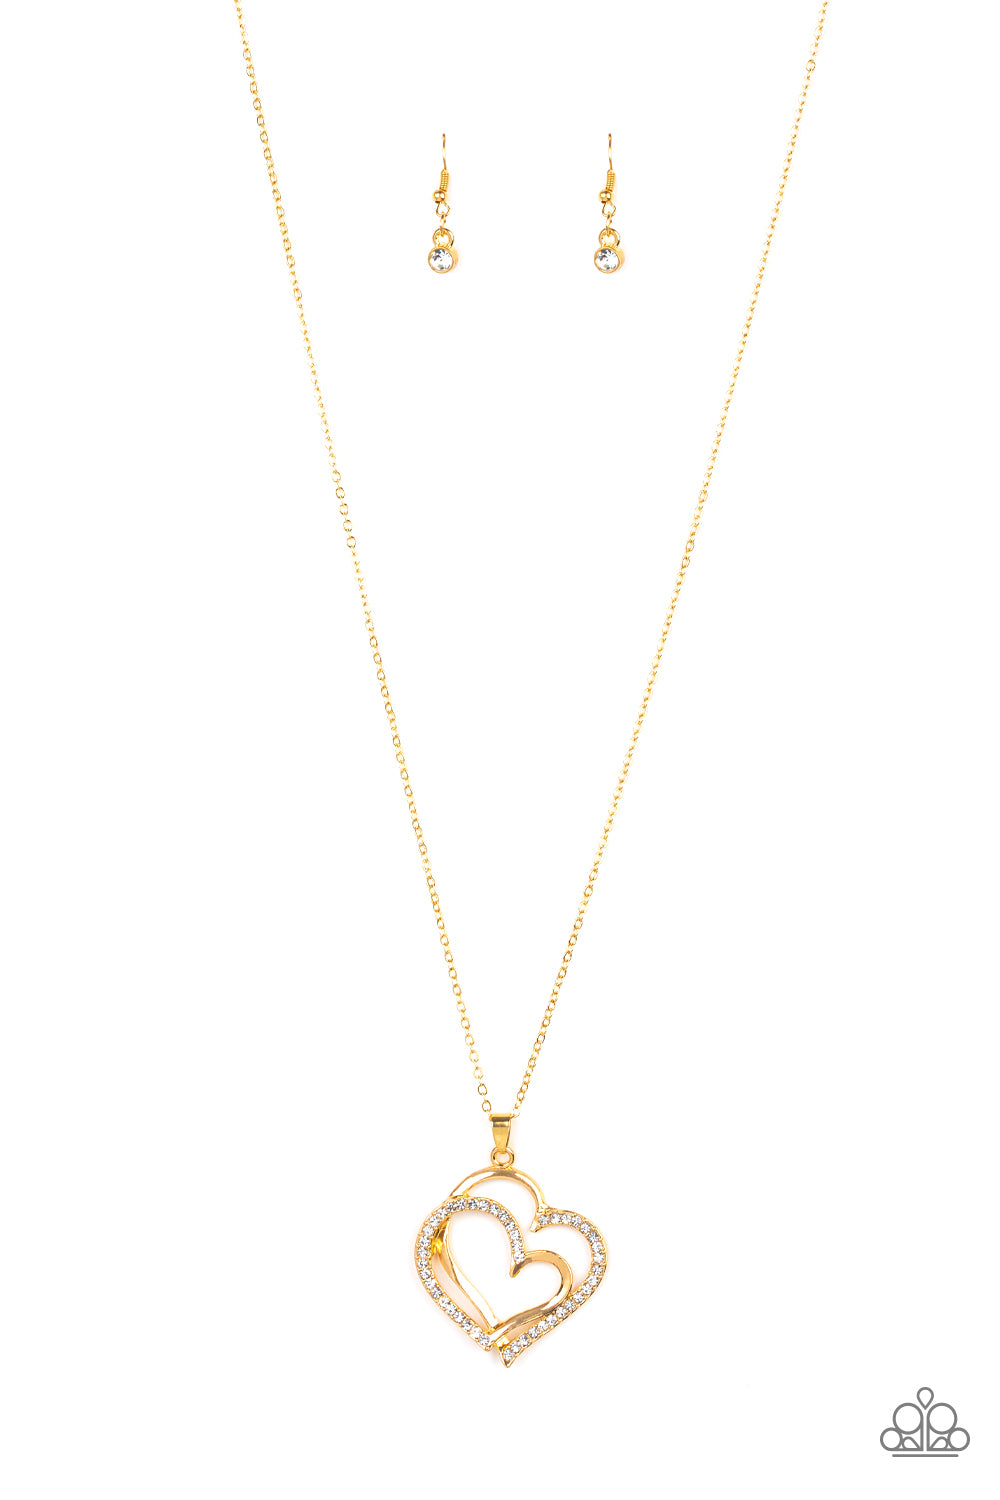 Lighthearted Luster - Gold Necklace Paparazzi Accessories Dainty Gold Heart Long Necklace